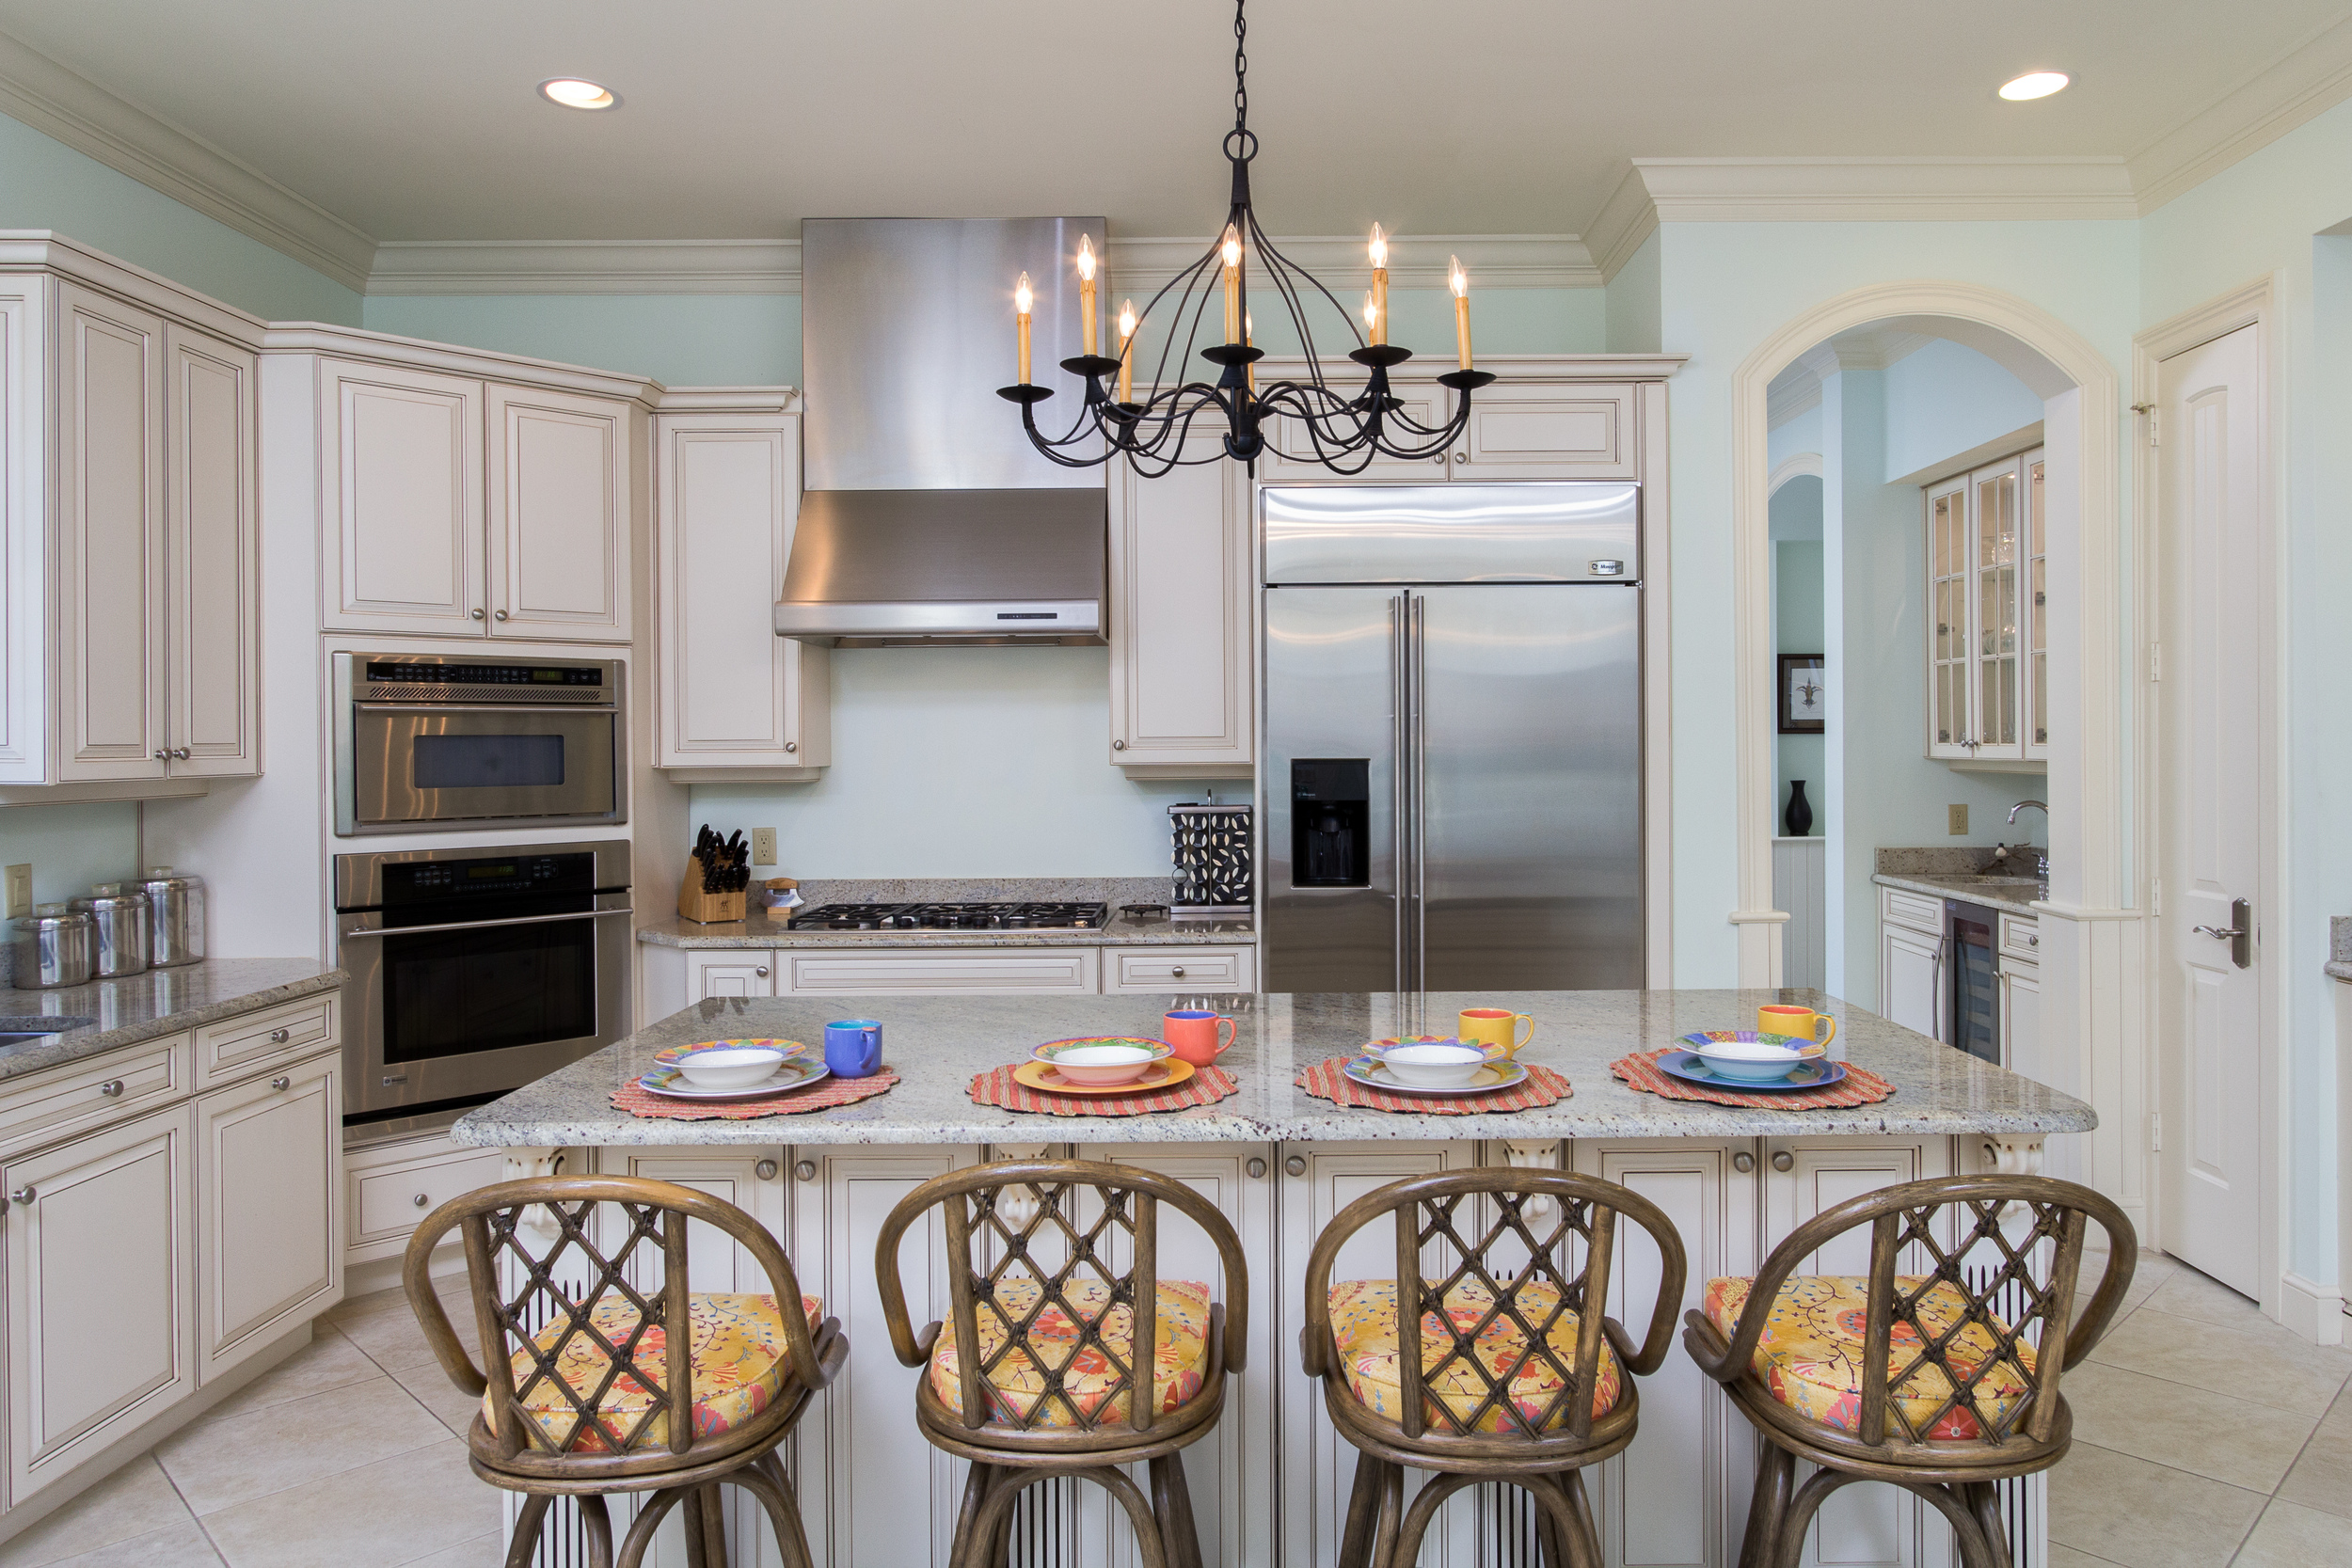 Luxurious island kitchen with stone counters and stainless steel appliances.